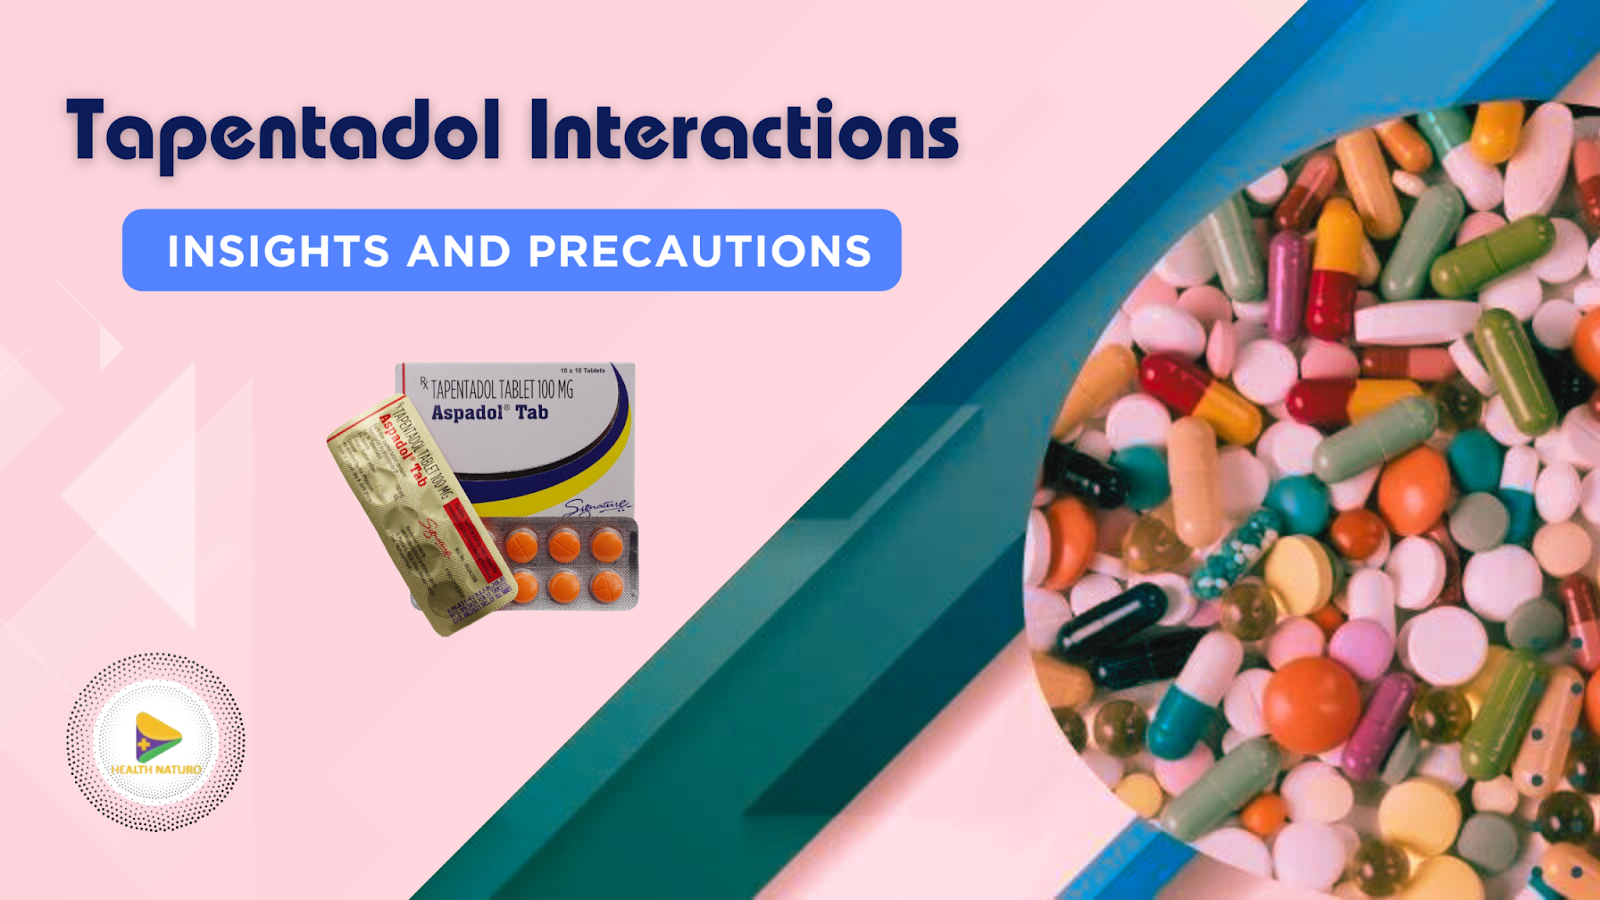 Tapentadol Interactions